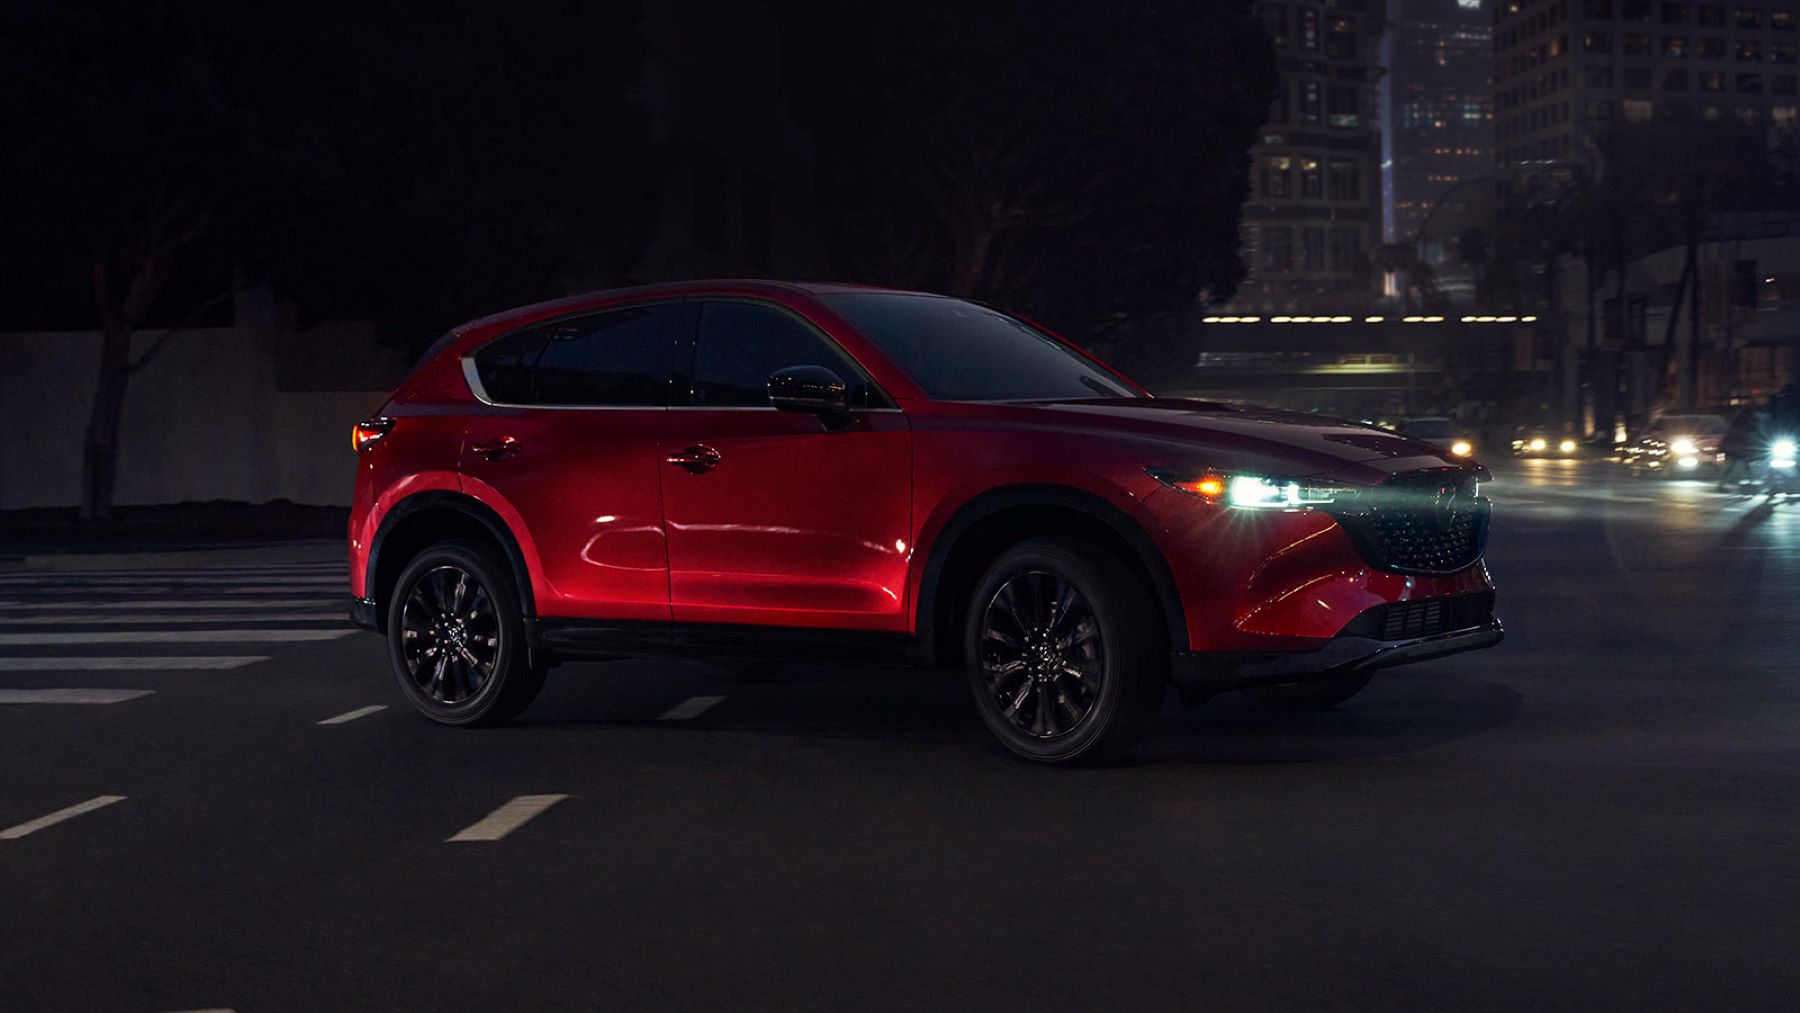 The 2022 Mazda CX-5 compact crossover SUV in red driving at night with its headlights on